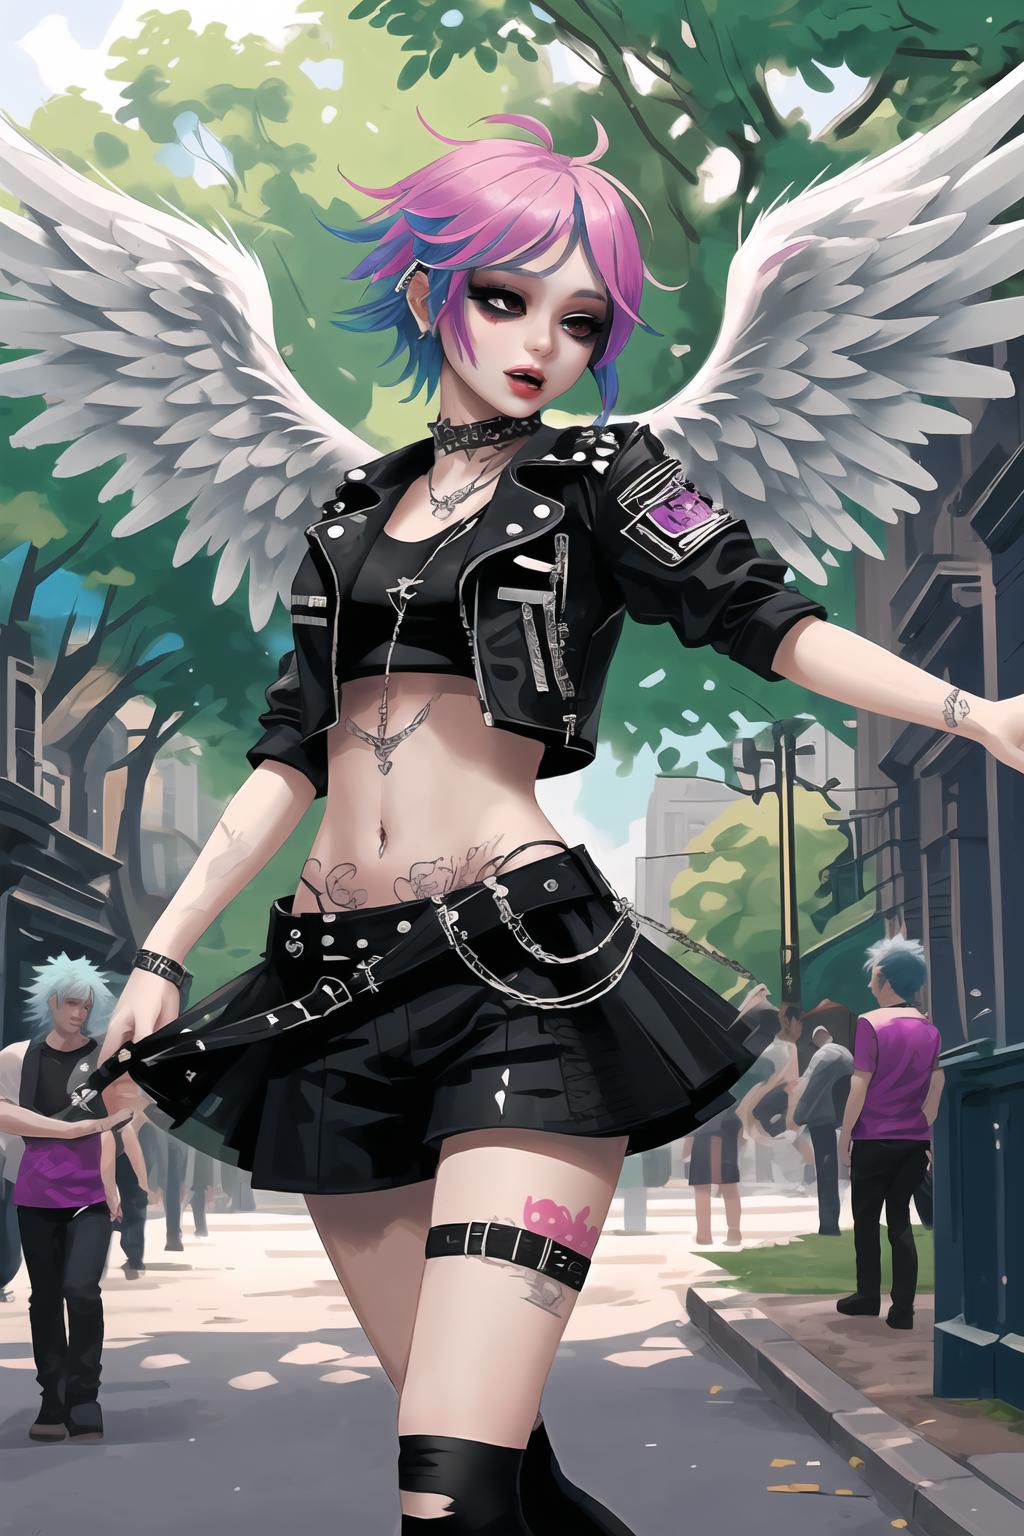 Fallen Angels Posters for Sale | Redbubble